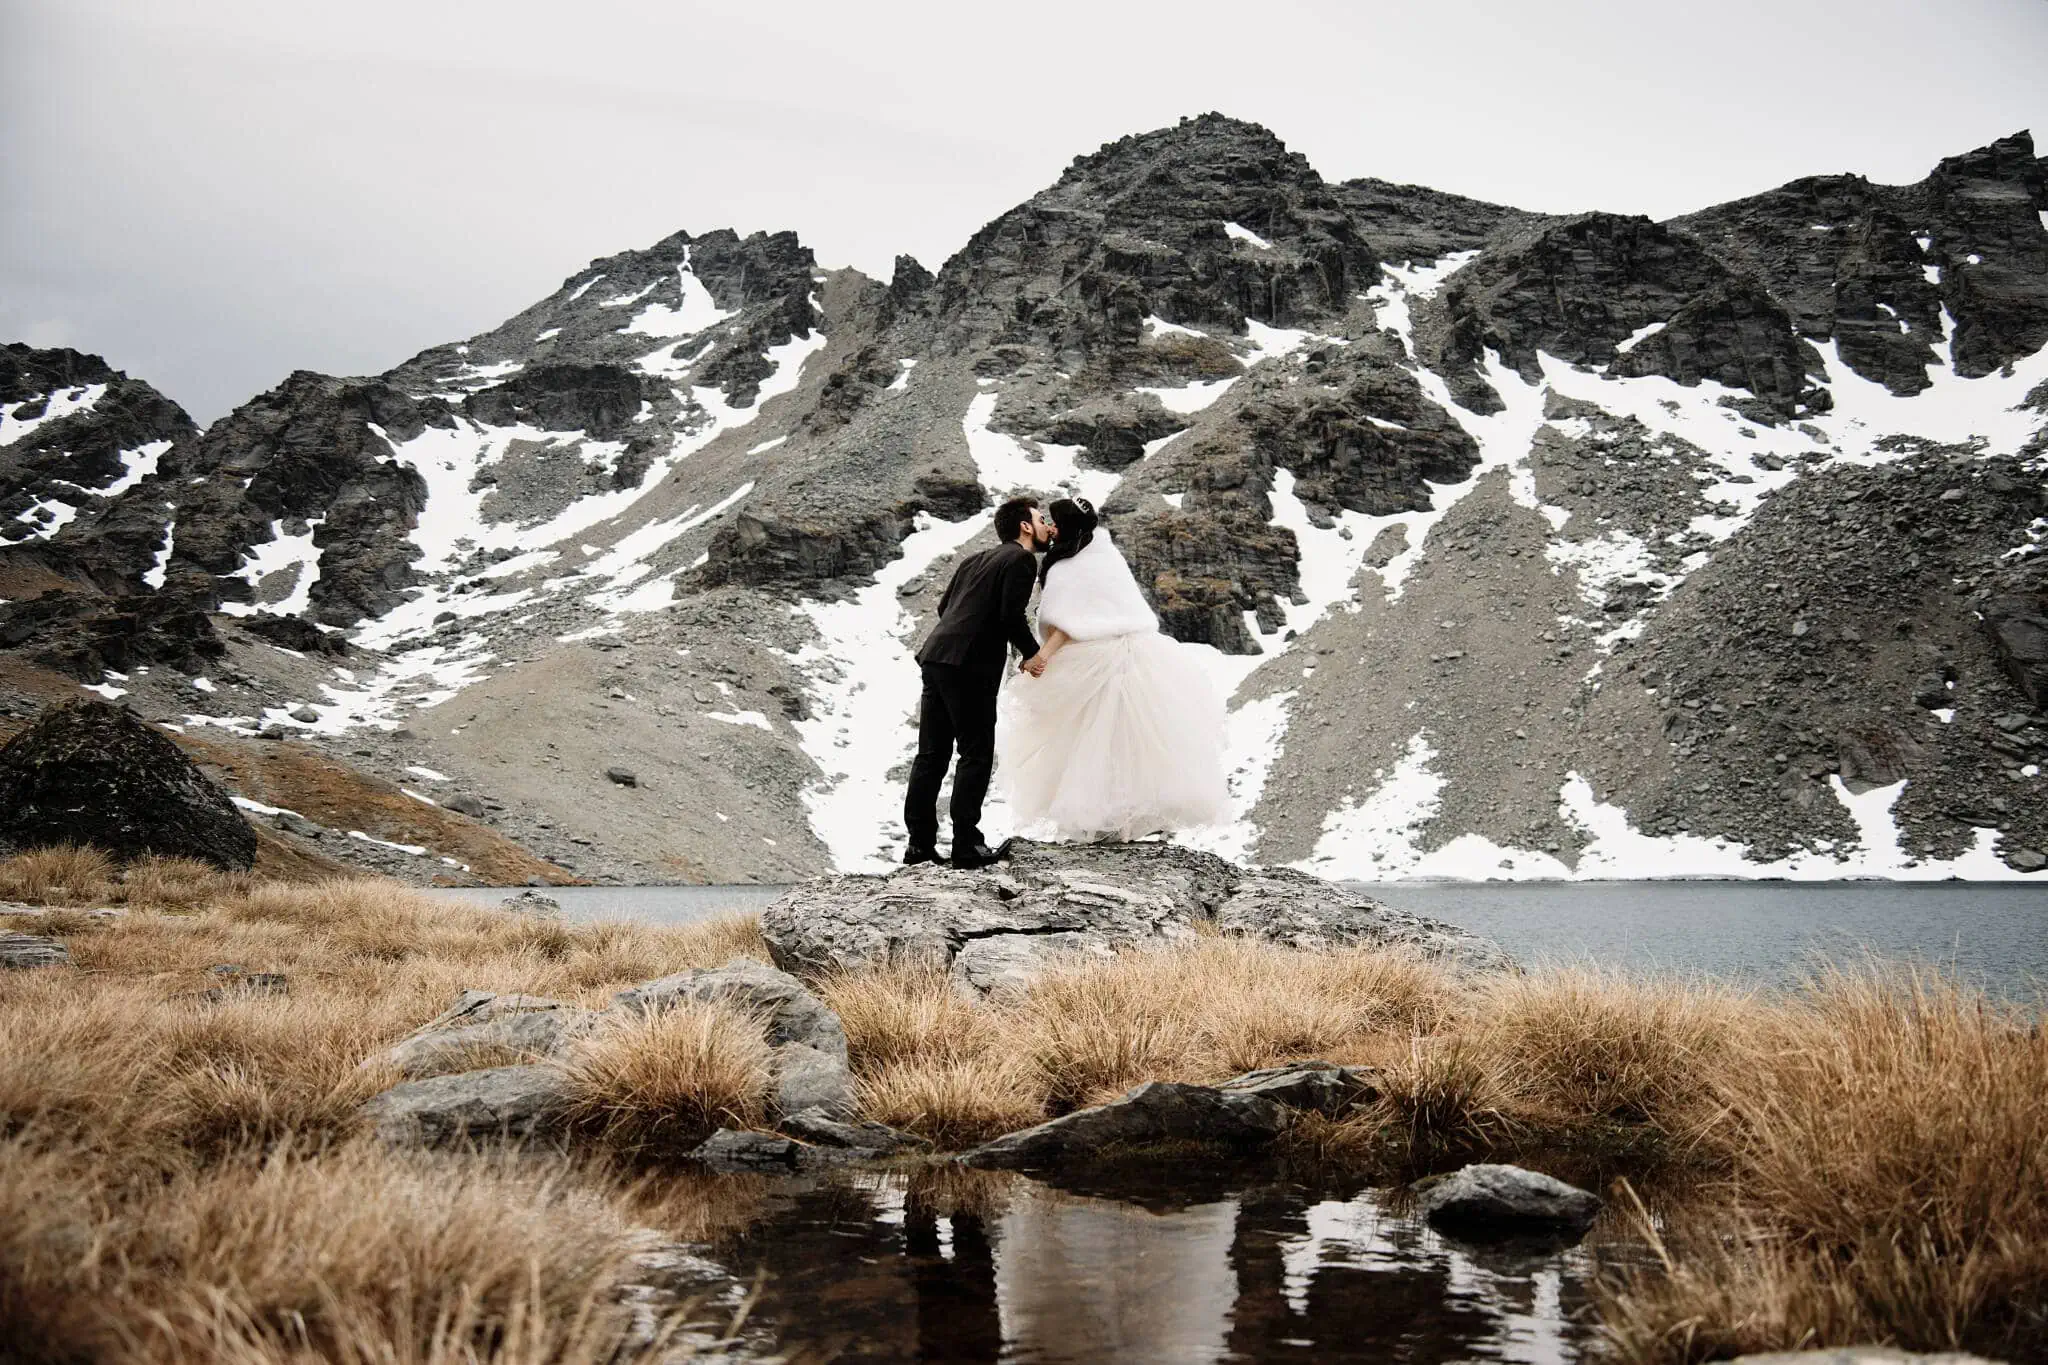 Carlos and Wanzhu share an intimate kiss at Cecil Peak, New Zealand.